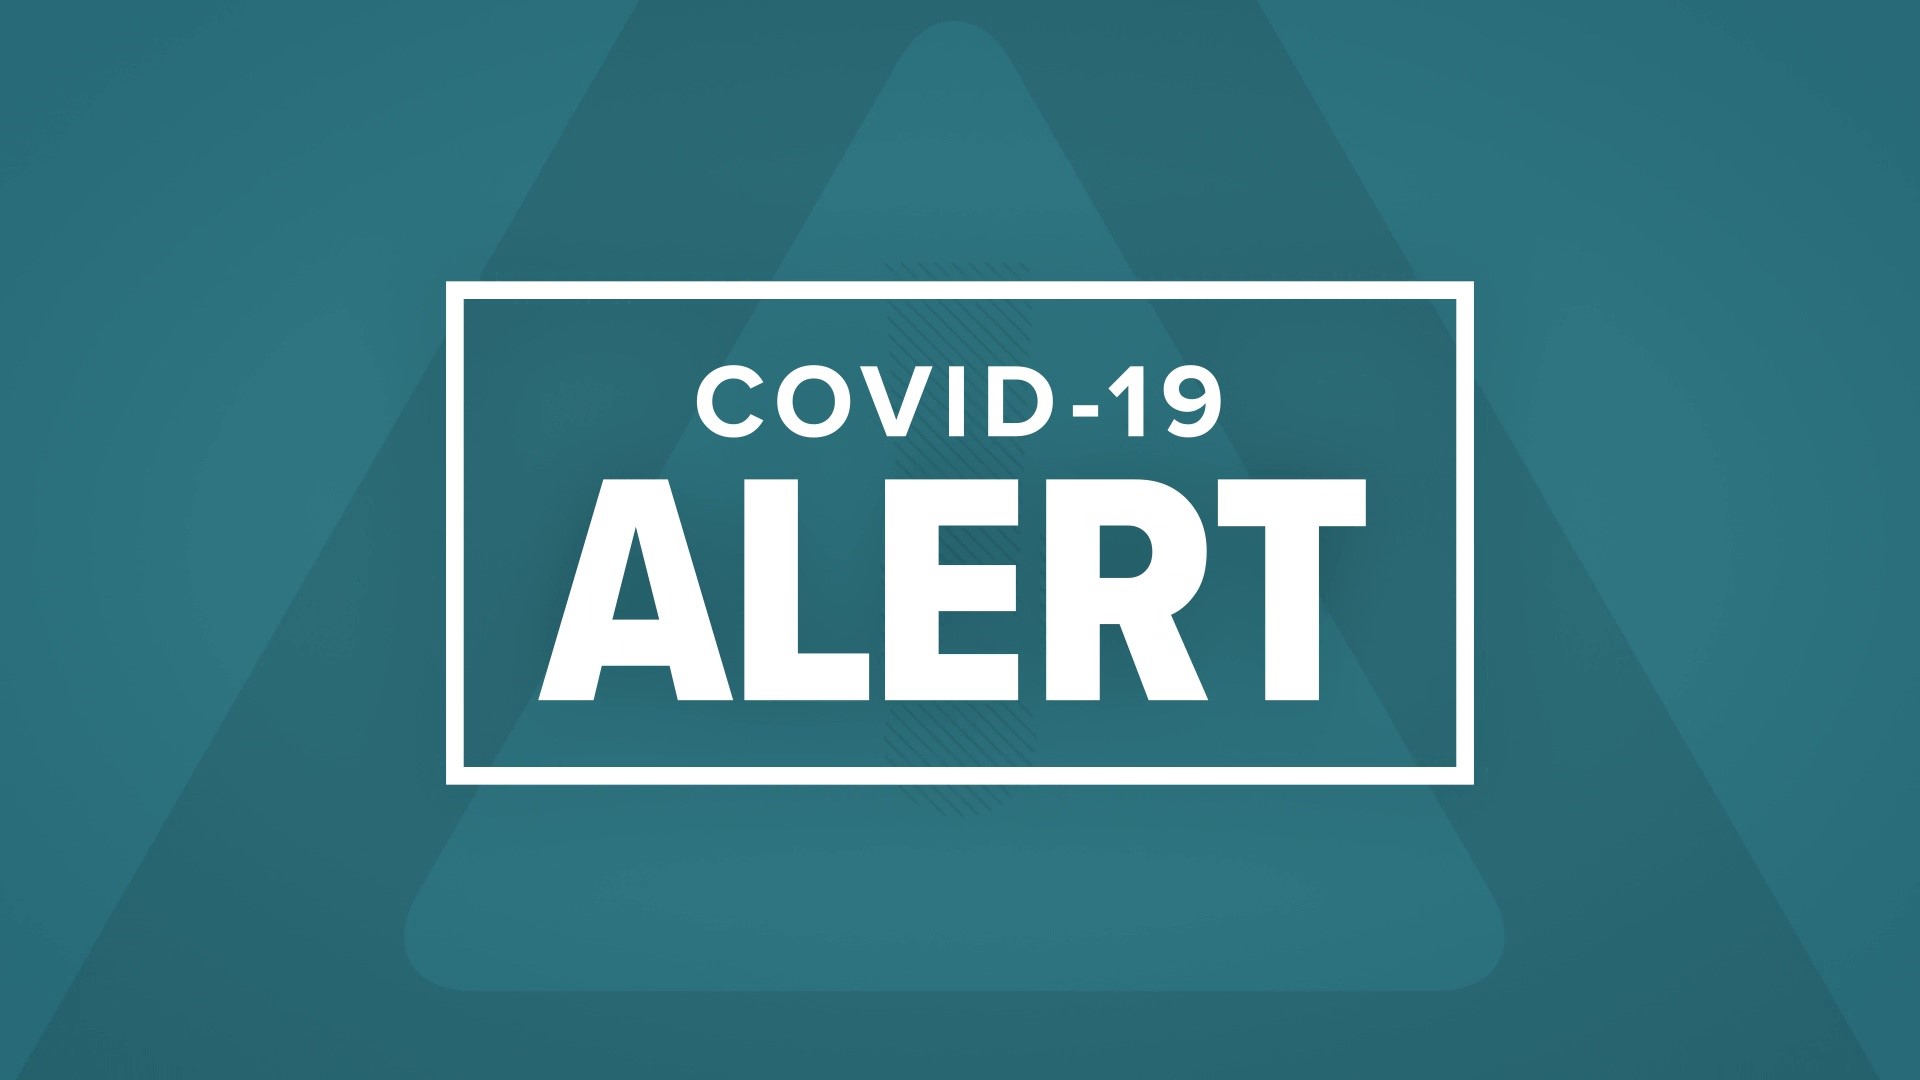 The Pennsylvania Department of Health has released COVID-19 statistics for the last week.